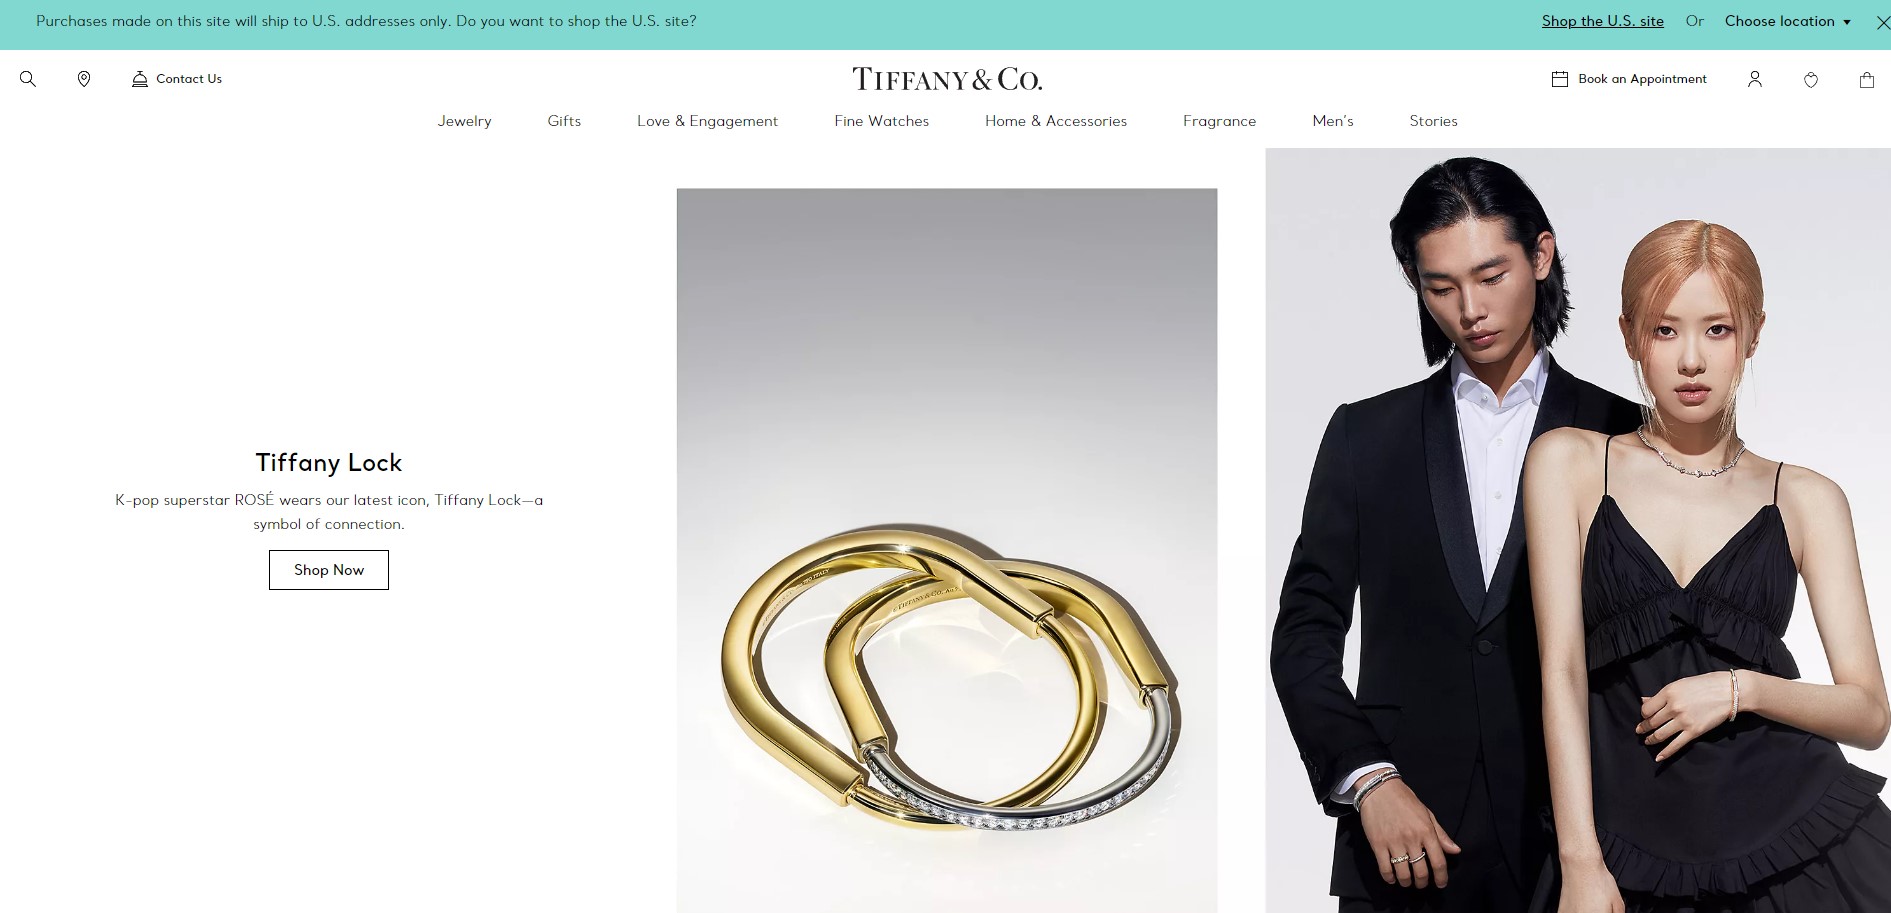 Tiffany & Co high-end braning colors